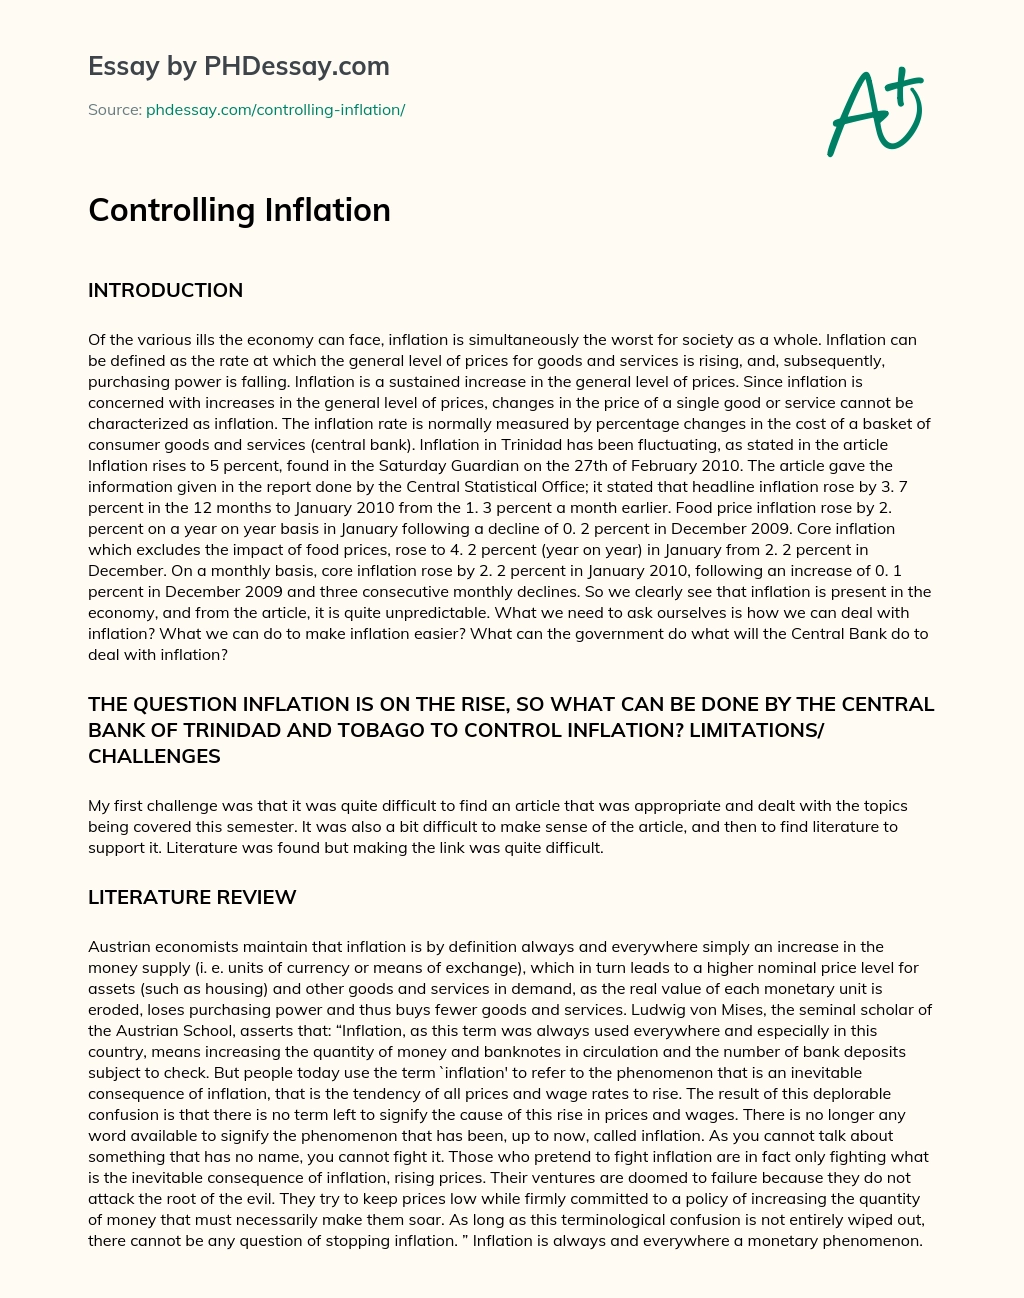 Controlling Inflation essay